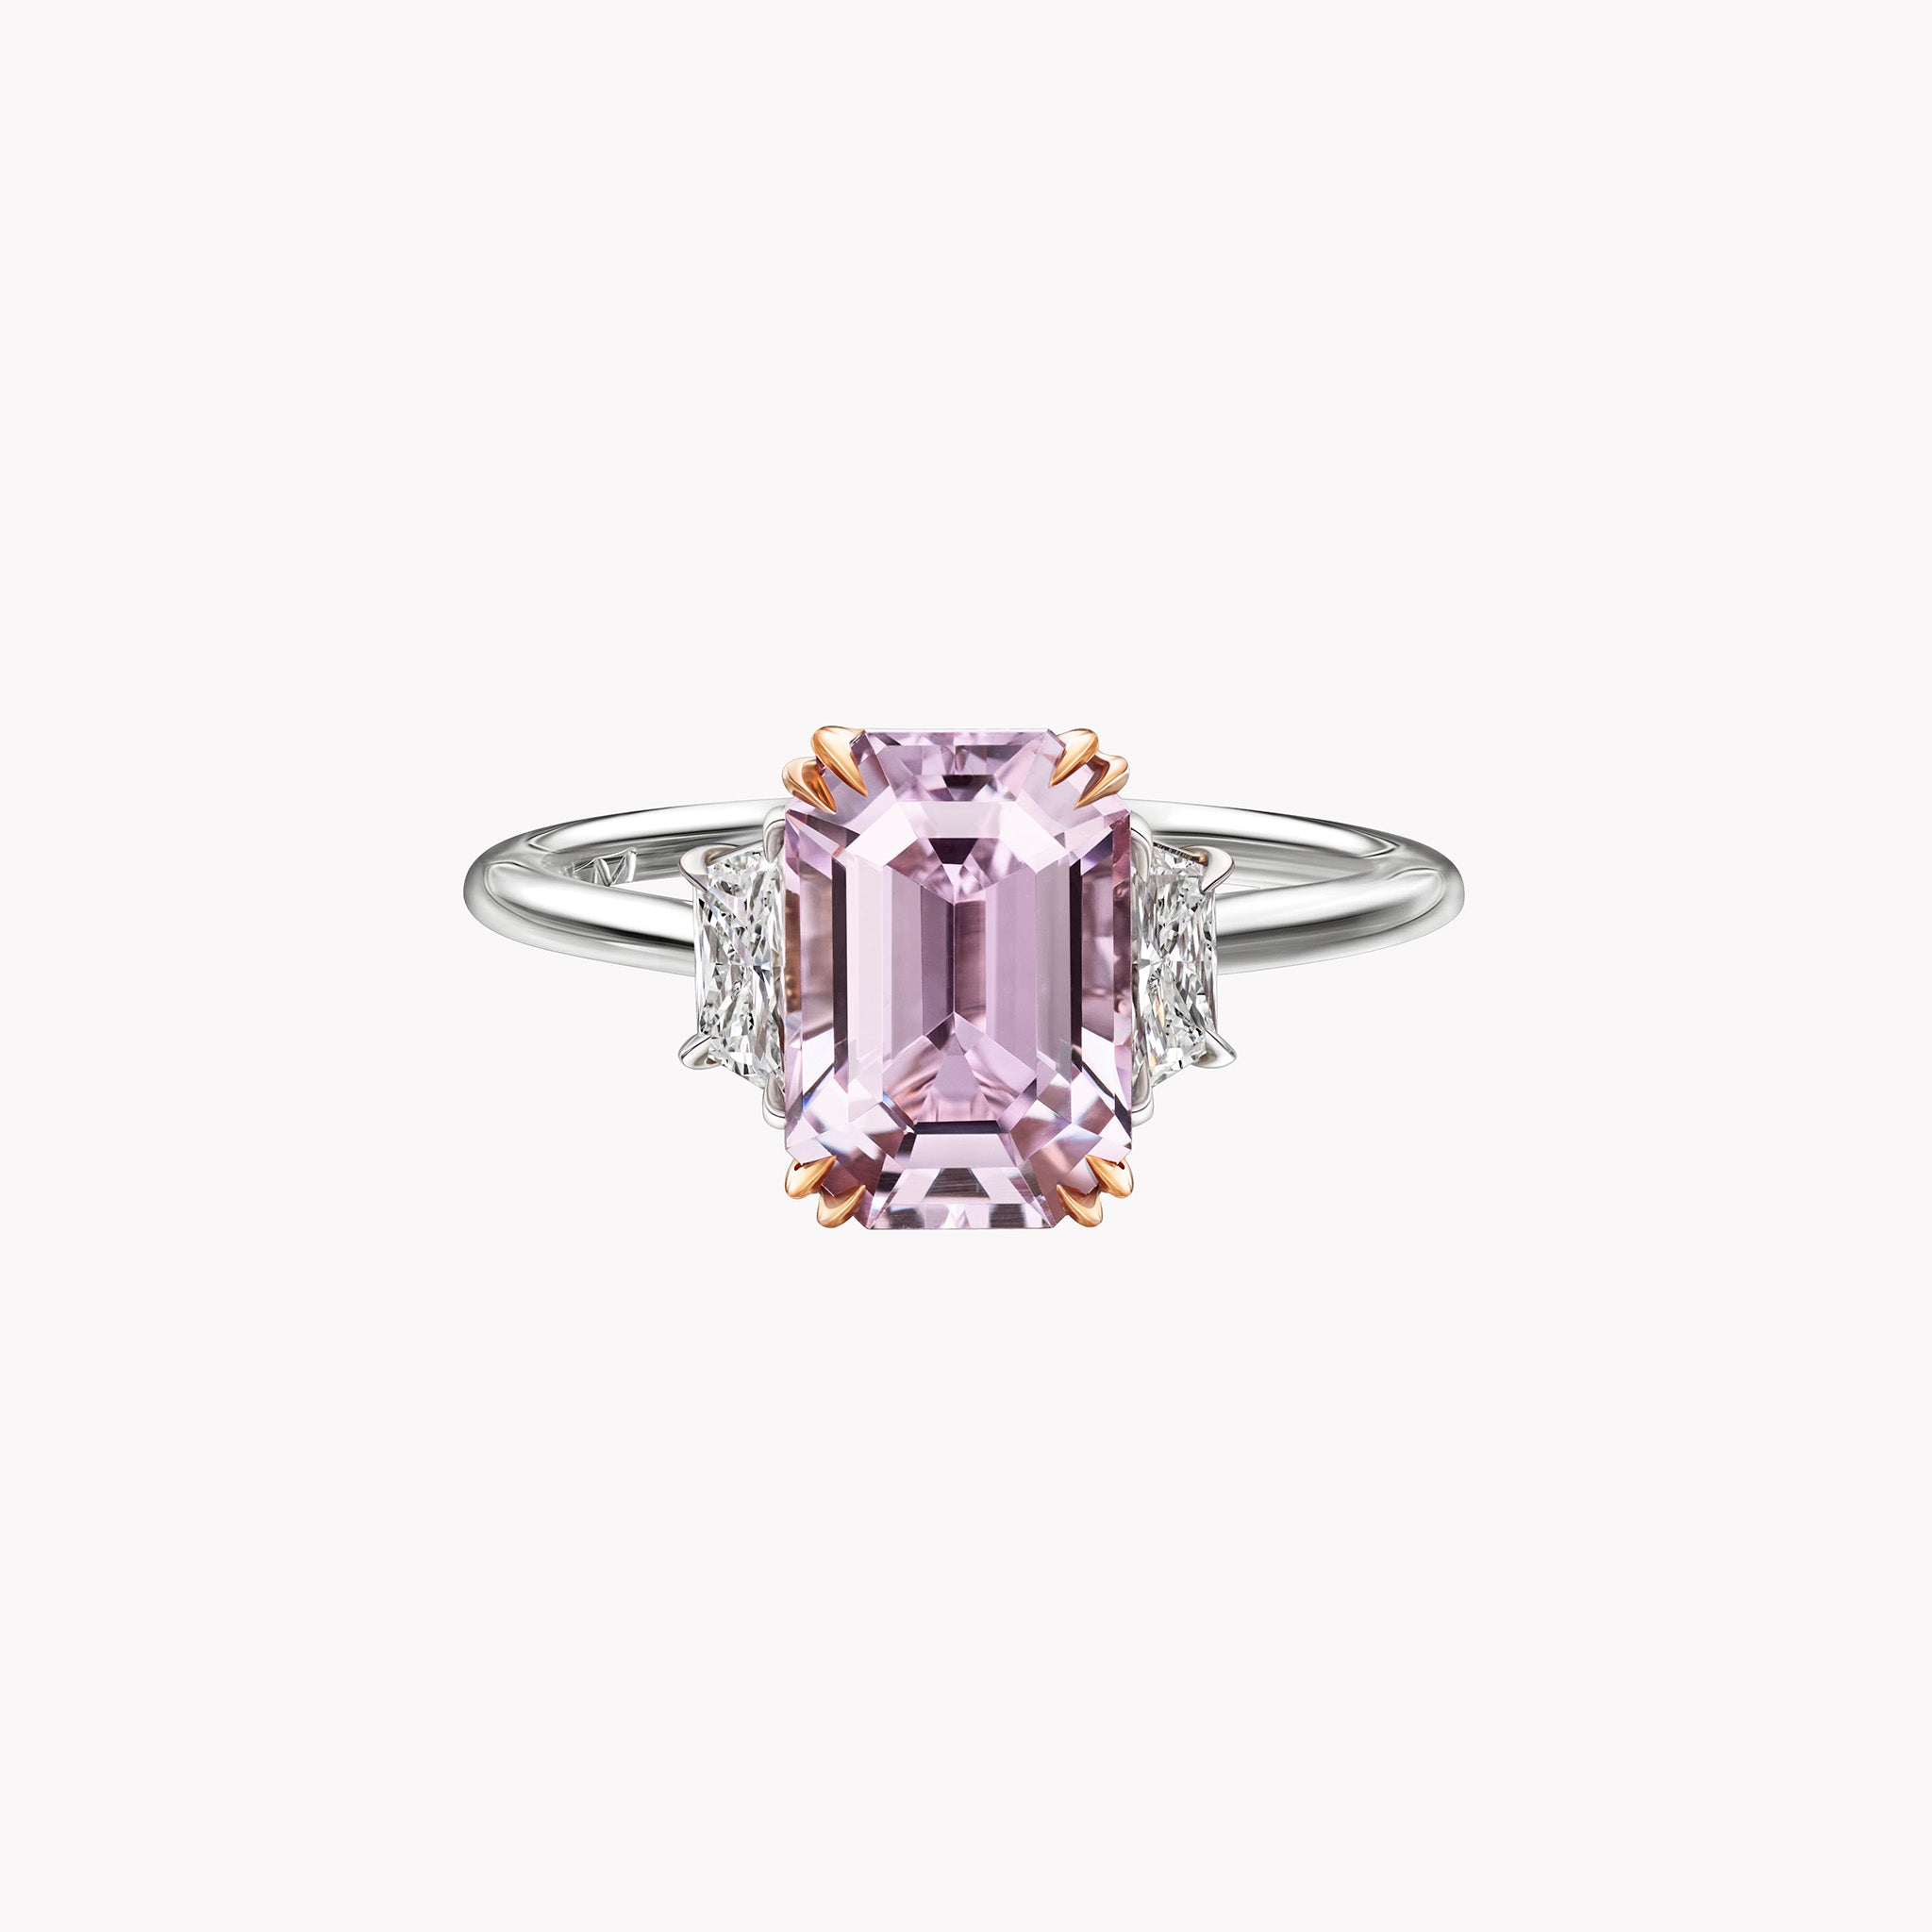 The Aster Lavender Sapphire Ring